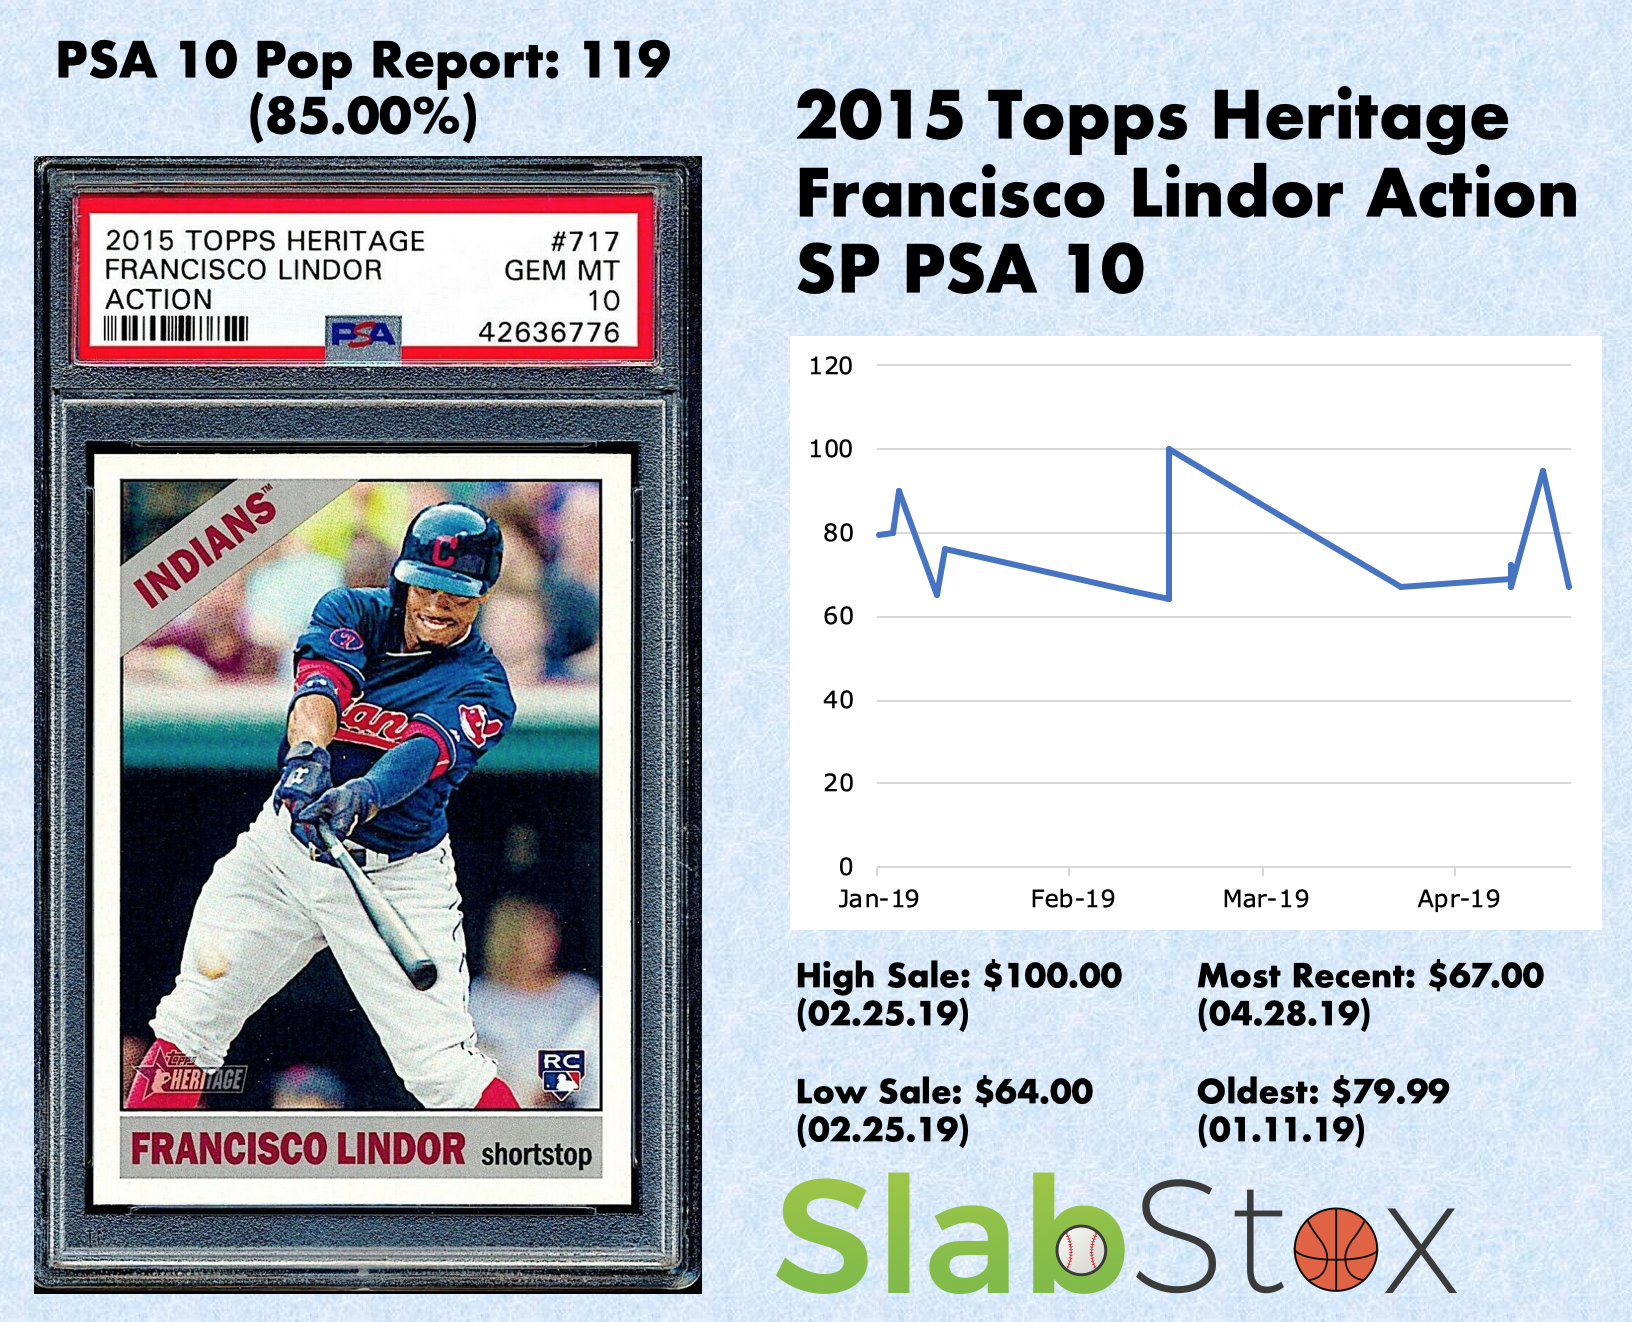 SlabStox infographic for 2015 Topps Heritage Francisco Lindor Action SP PSA 10 sports trading card